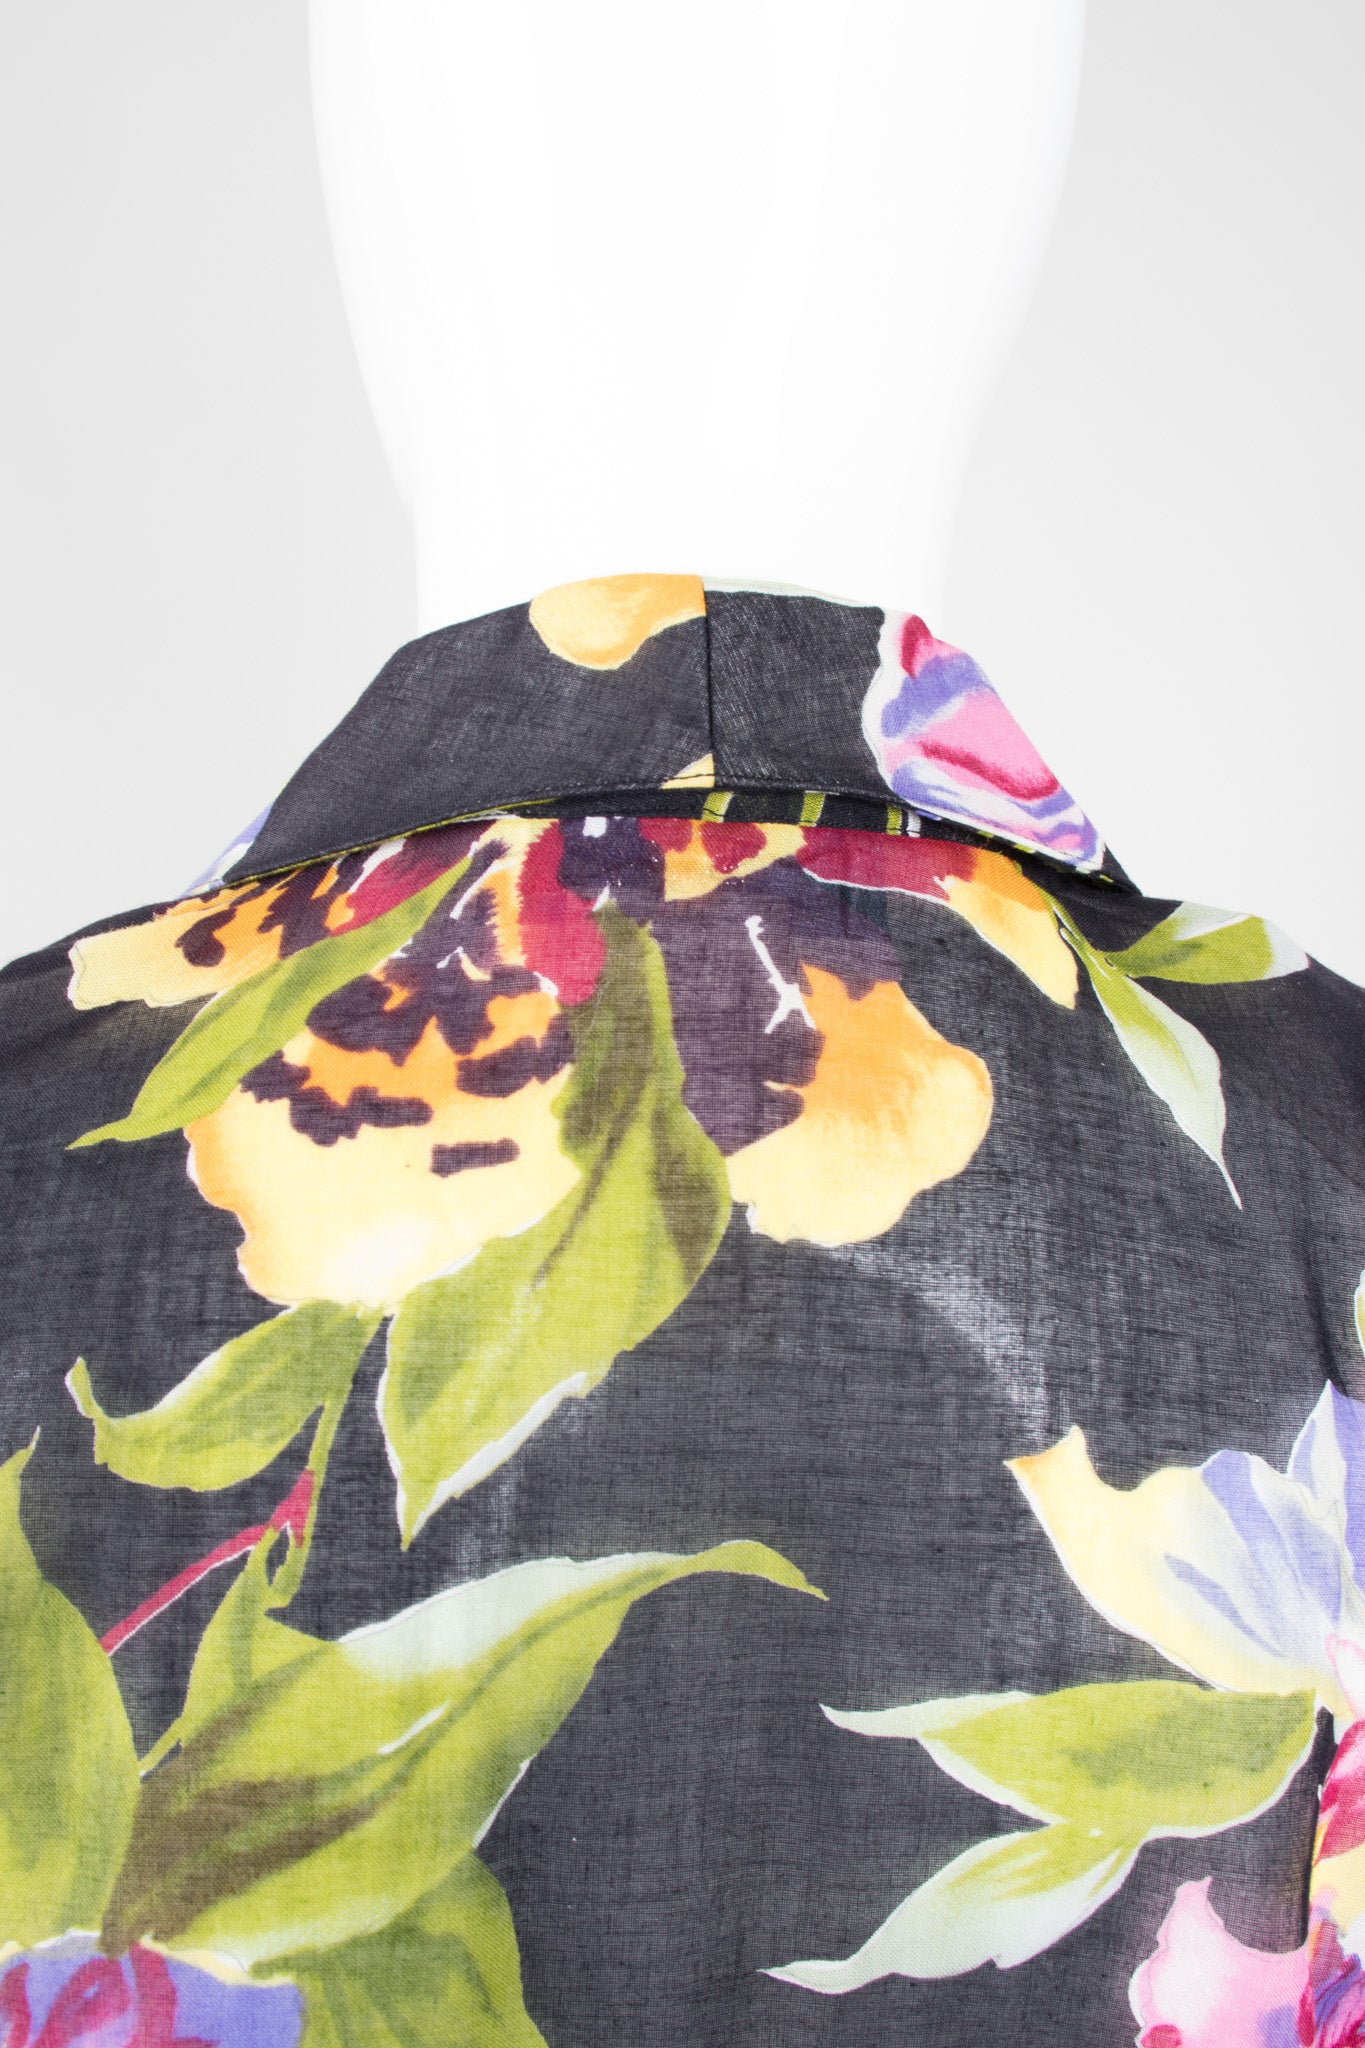 Thierry Mugler Floral Tie-Front Dress